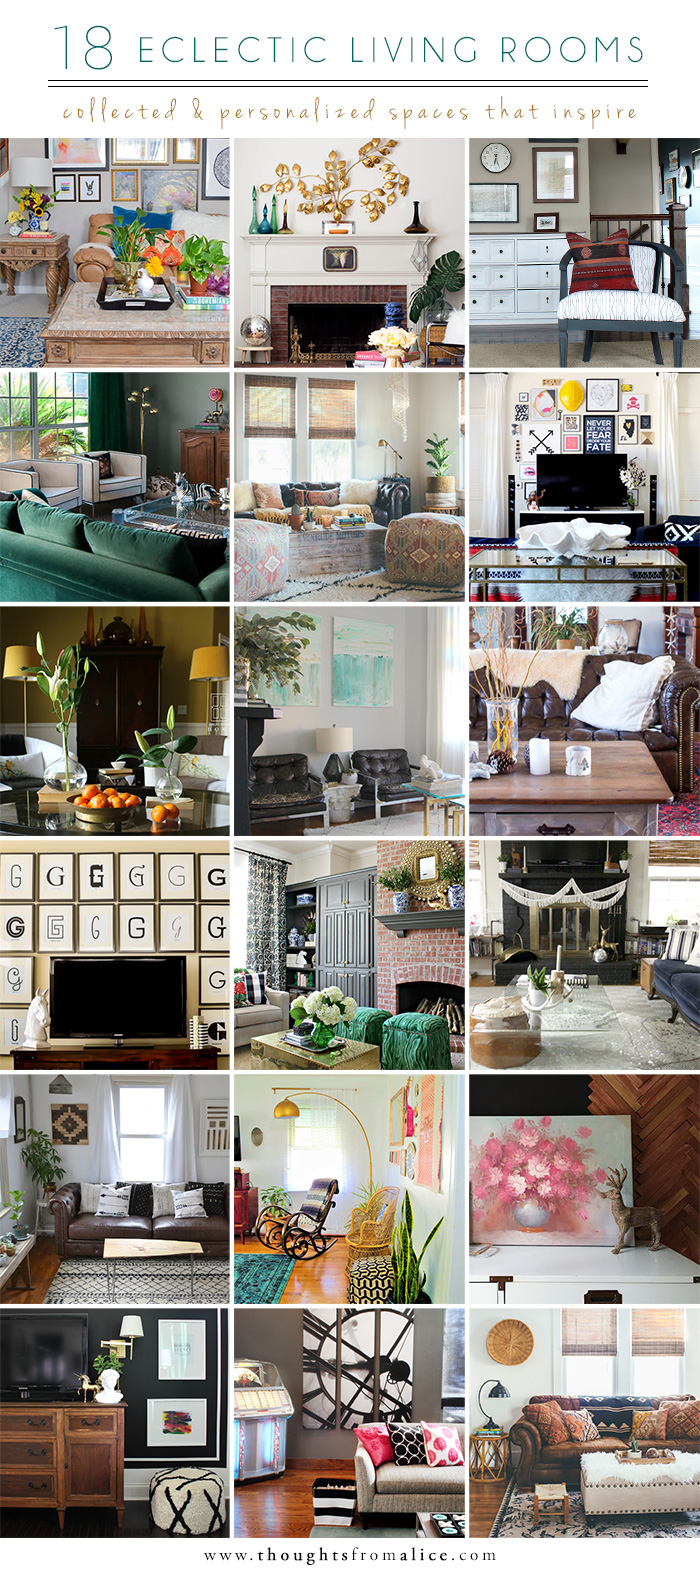 18 Eclectic Living Rooms: Collected Spaces that Inspire